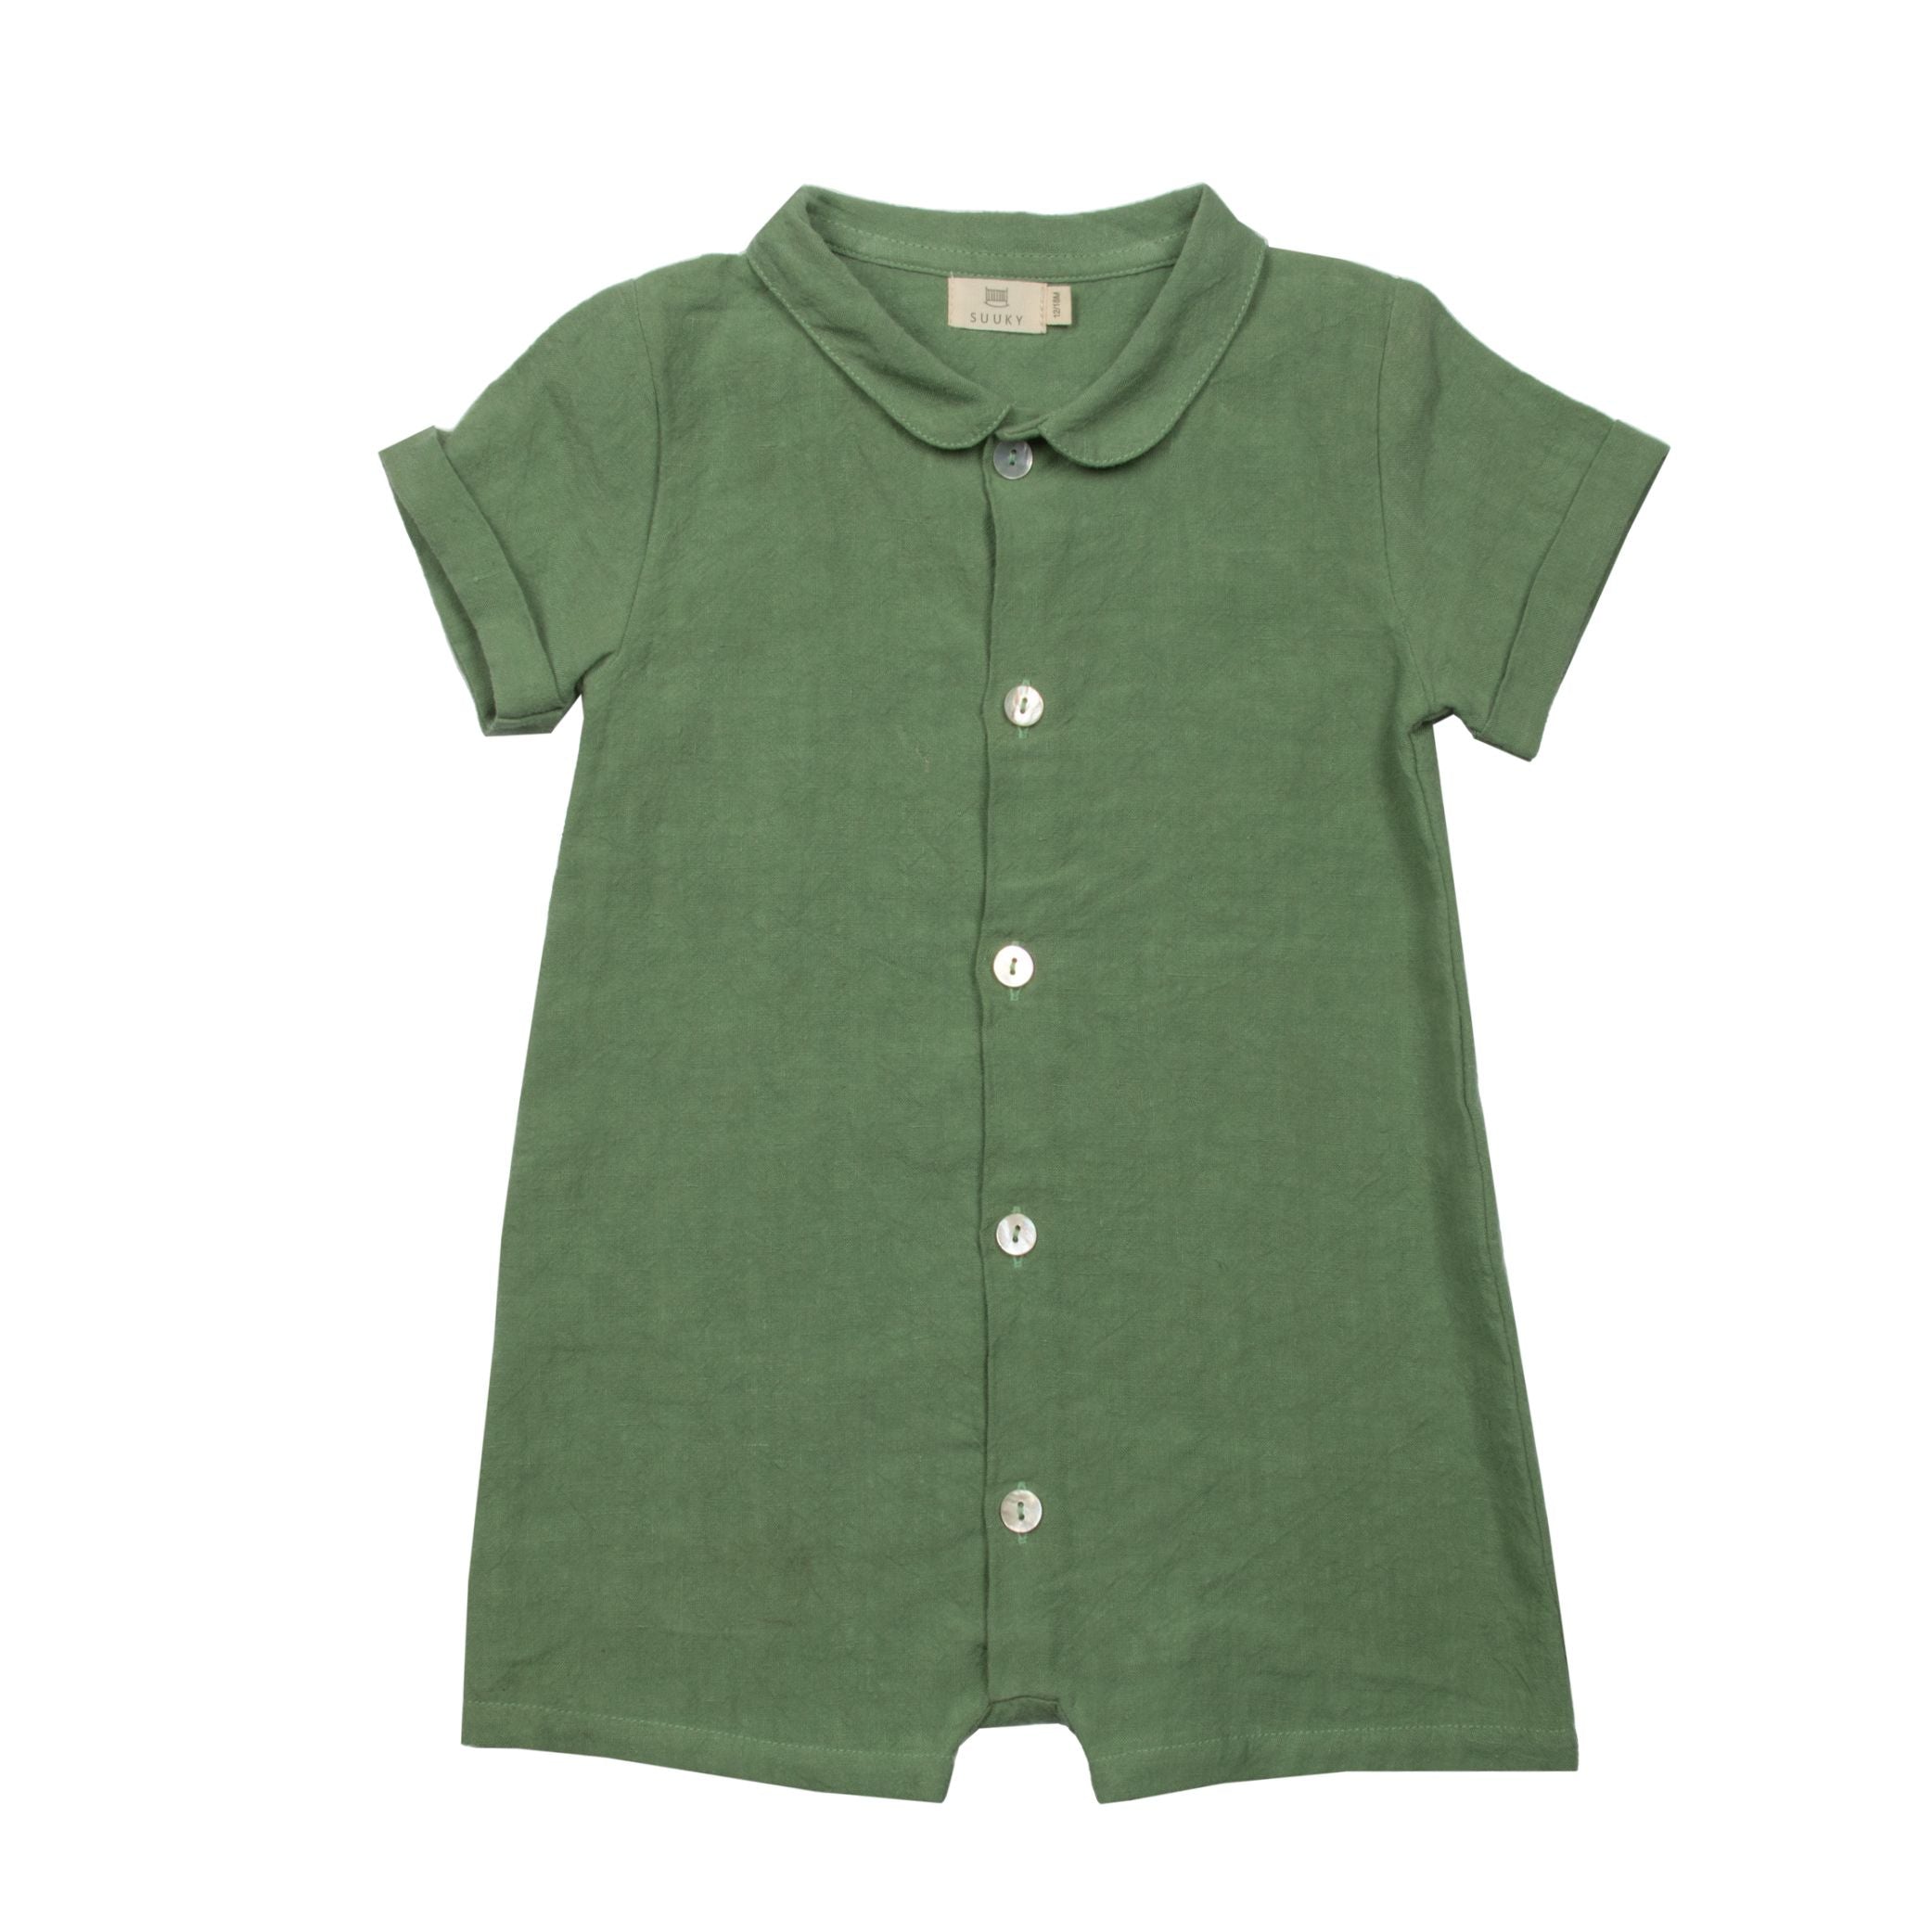 Suuky Porto Green Linen Romper, Oyster Buttons. Premium Portuguese linen. made in Portugal. Sizes 3-6 months to 18-24 months. Short sleeve with collar. Perfect for polo club, palm beach vacation, garden wedding. First birthday gift.  free shipping to Canada and the US on orders over $100, with standard shipping rates of $6 CAD / $4.30 USD for orders below. Plus, rest assured, duties into the United States are included. Baby outfits for wedding.